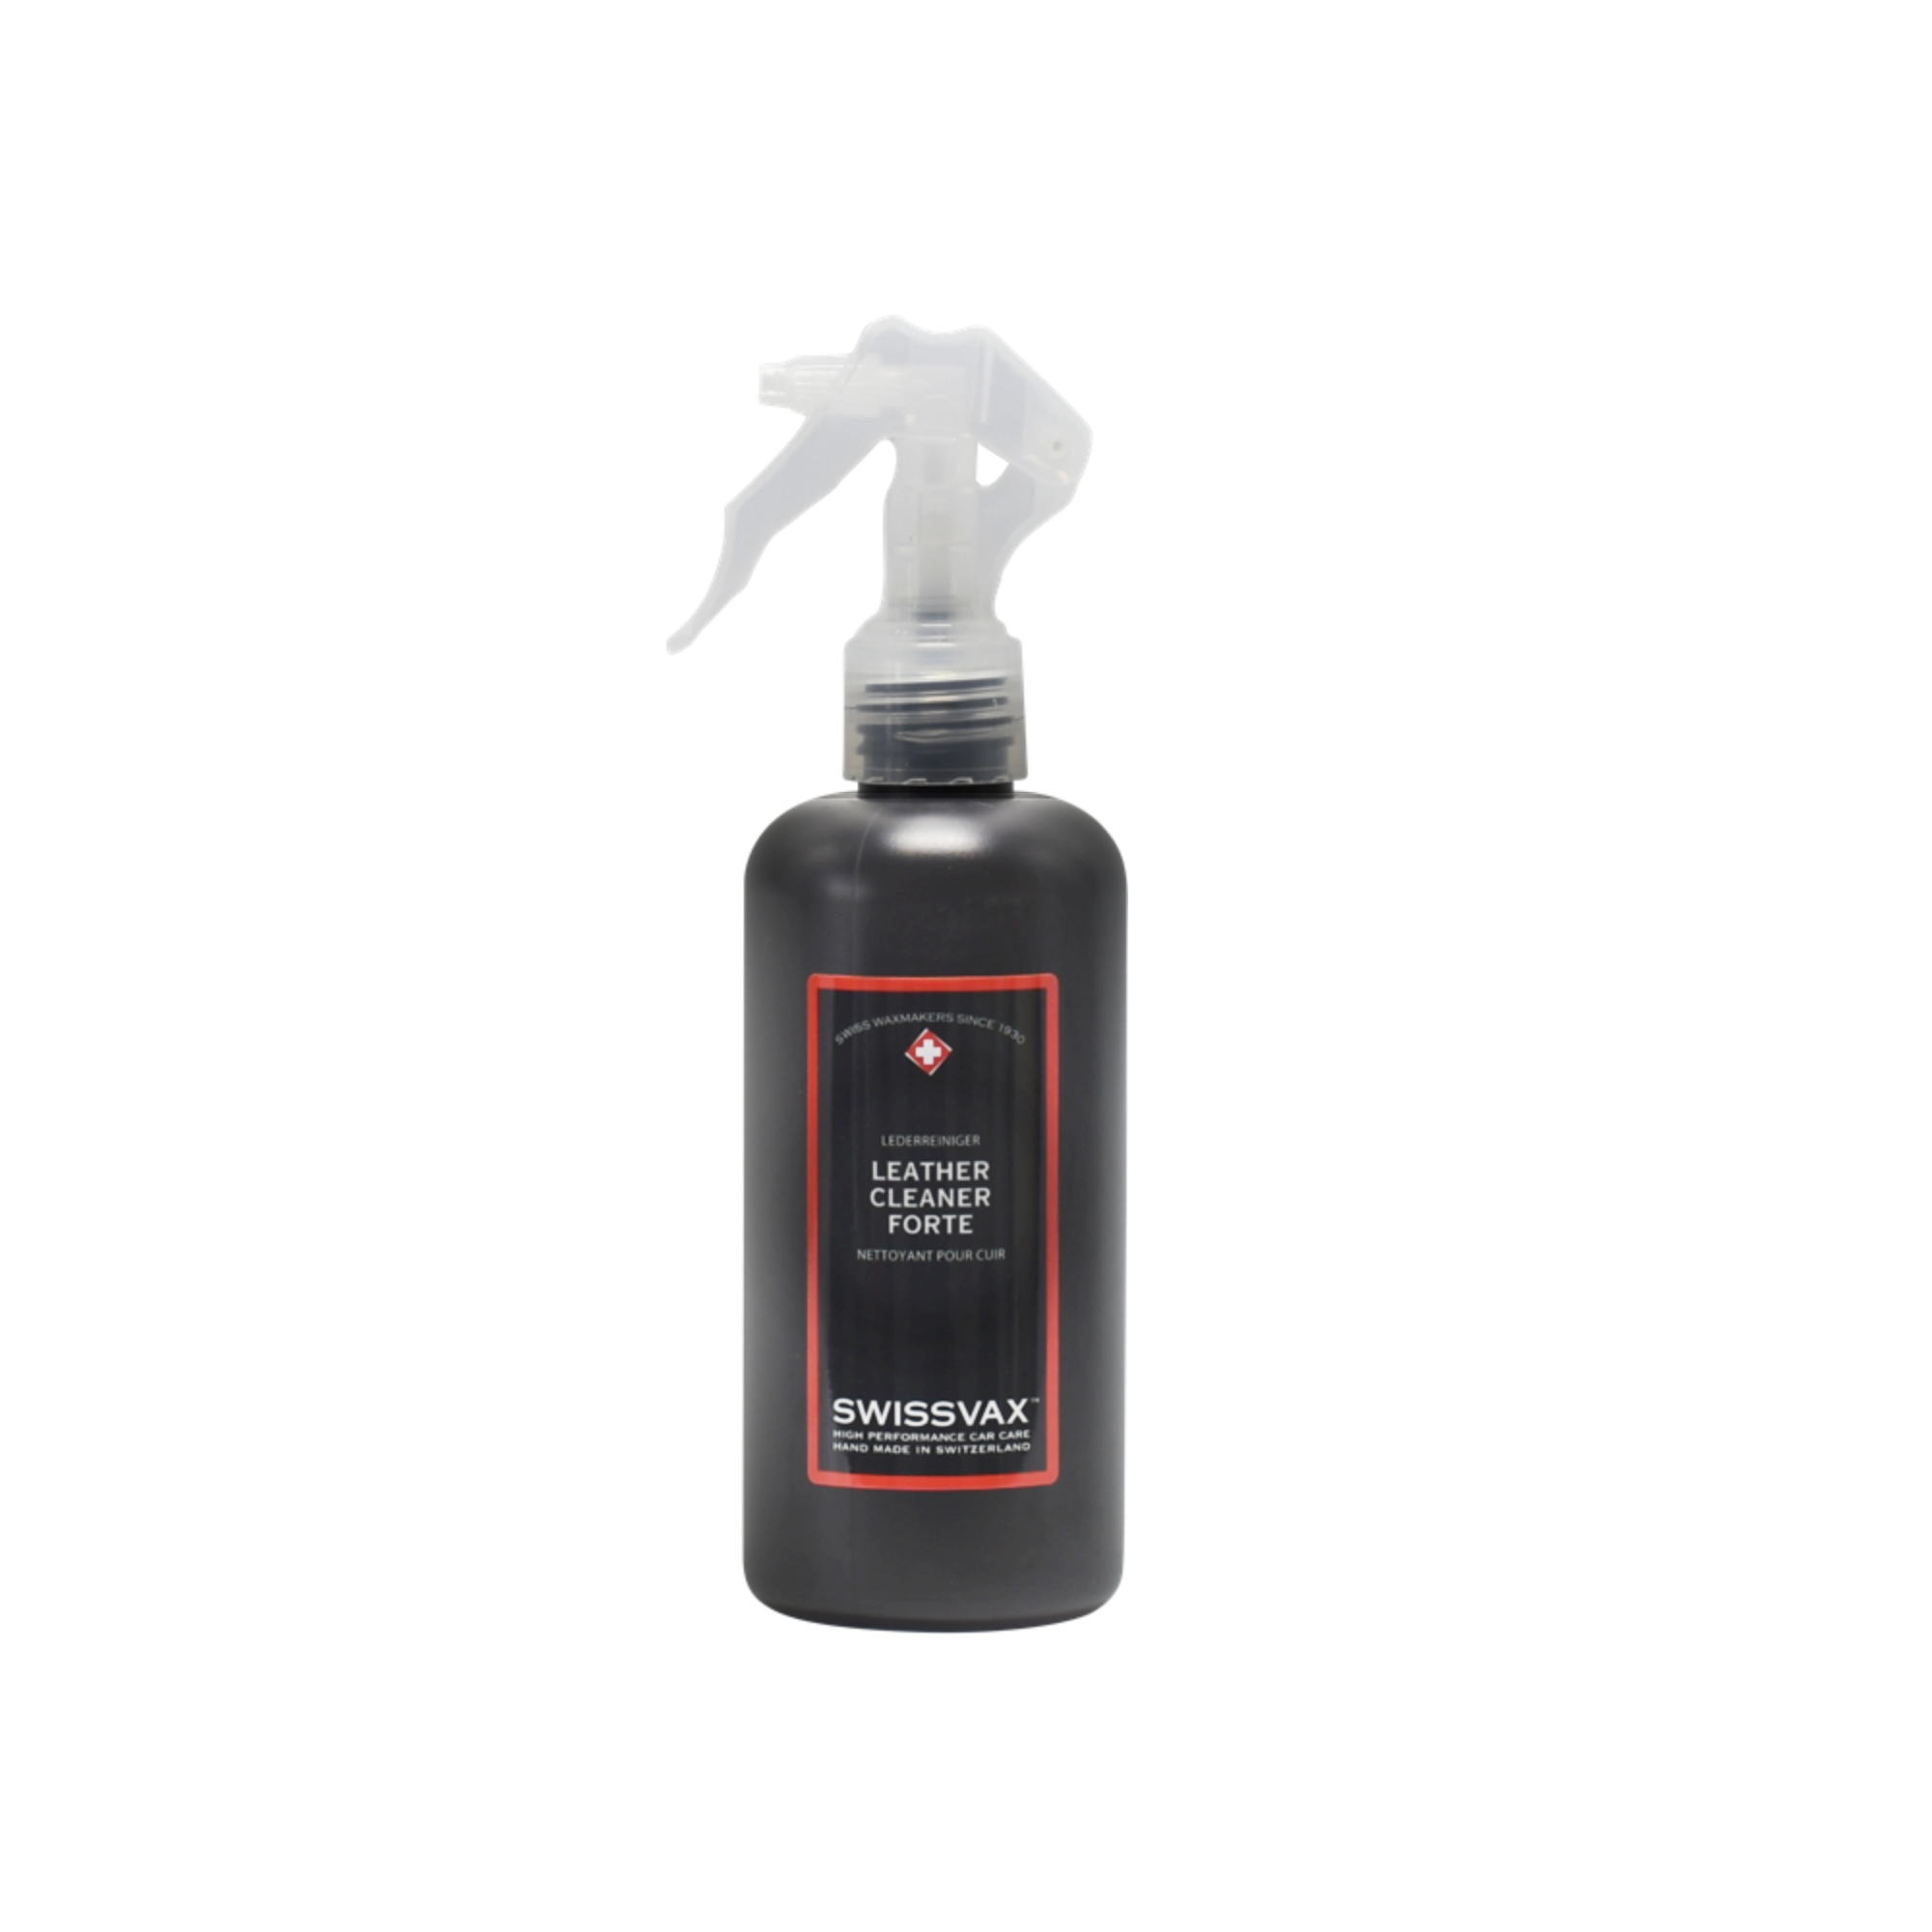 Swissvax LEATHER CLEANER FORTE (Strong formulation)